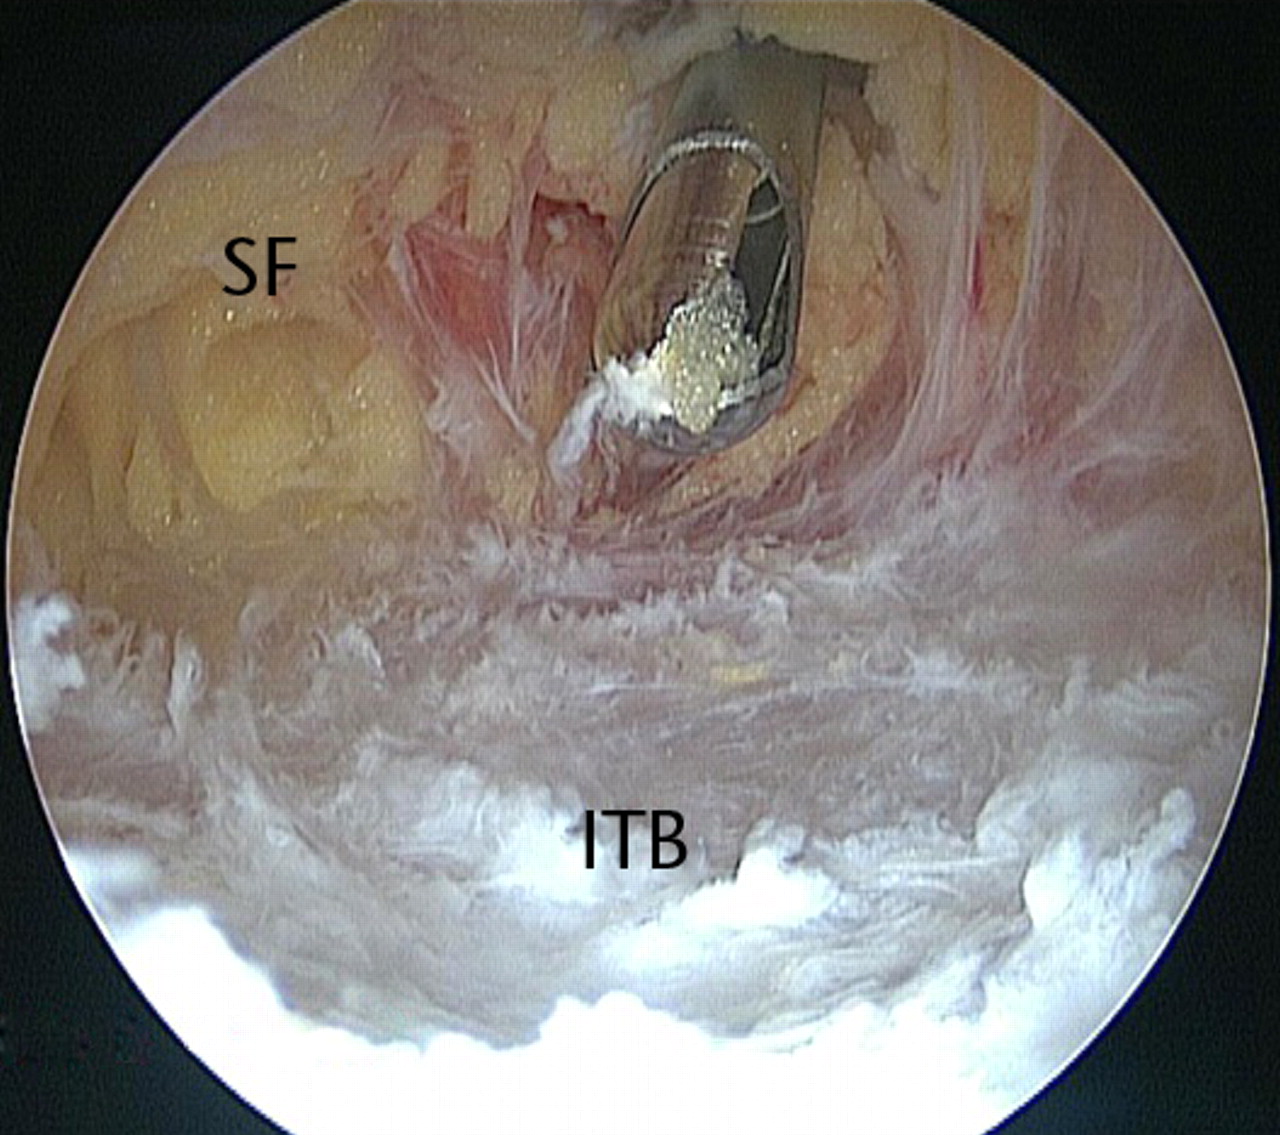 Figs. 11a - 11c 
          Arthroscopic images of the
left hip of a 64-year-old woman with persistent pain following arthroscopic
release of the iliotibial band (ITB) and excision of the trochanteric
bursa. A revision endoscopy (a) revealed that the ITB flaps had
healed back together. Upon opening of the ITB, significant adhesions (arrow)
were found to have formed in the lateral compartment (b), tethering
the ITB to the greater trochanter. After adhesiolysis and release
of the ITB as distal as the origin of the vastus lateralis (c),
there were marked improvements in symptoms, and the procedure was
repeated on the right hip after seven months, with similar success
(SF, subcutaneous fat; GT, greater trochanter; VL, vastus lateralis;
aITB/pITB, anterior/posterior flap of the iliotibial band).
        